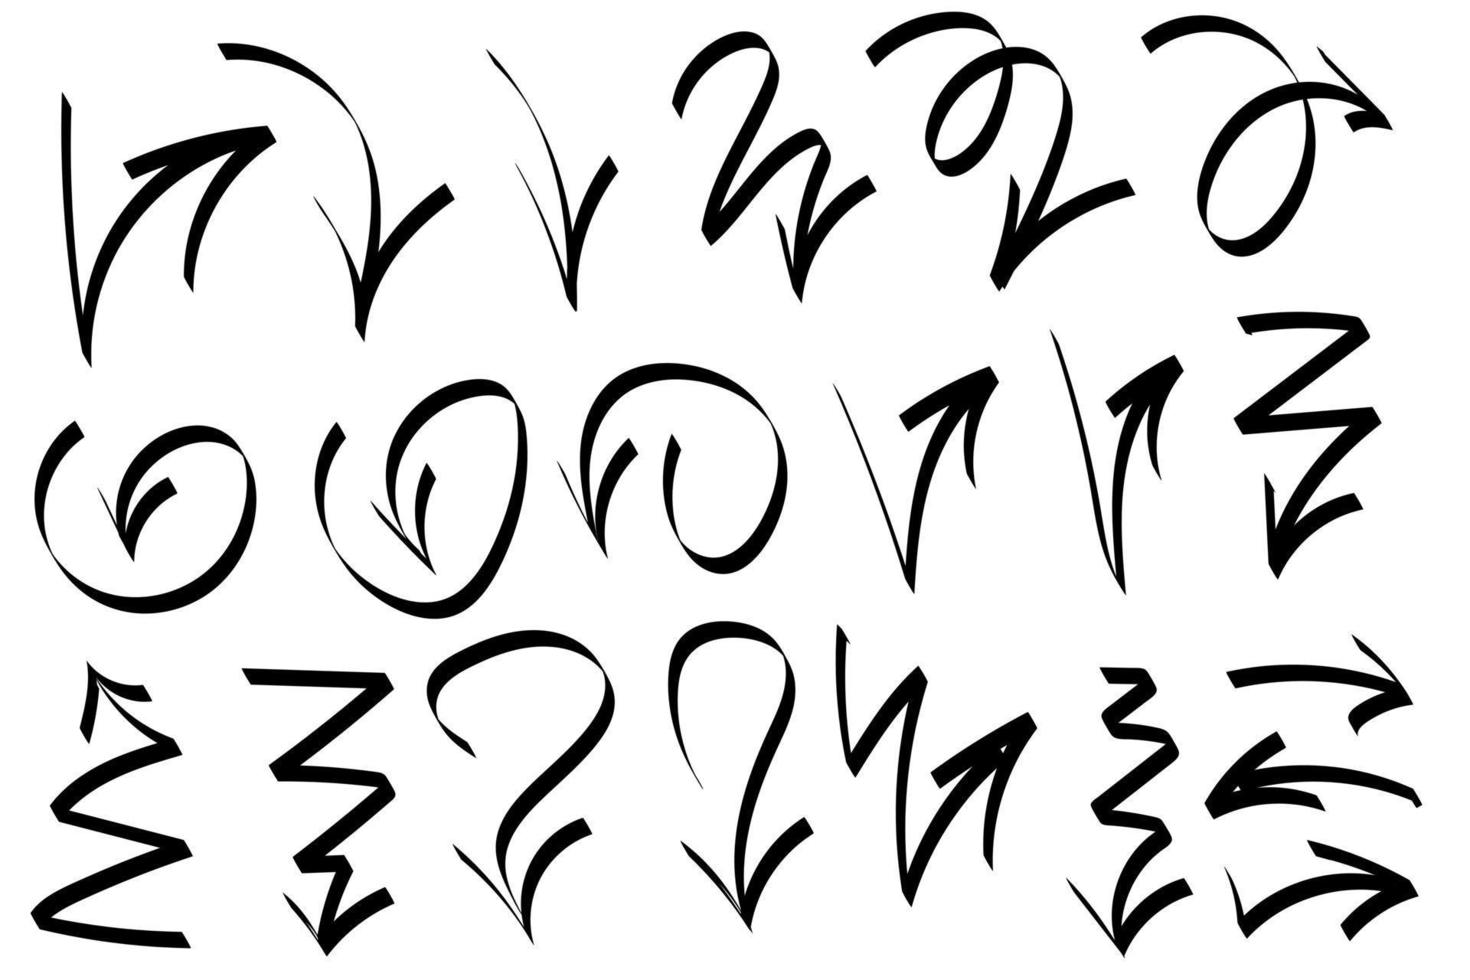 Vector pointers and arrows, grunge brush strokes